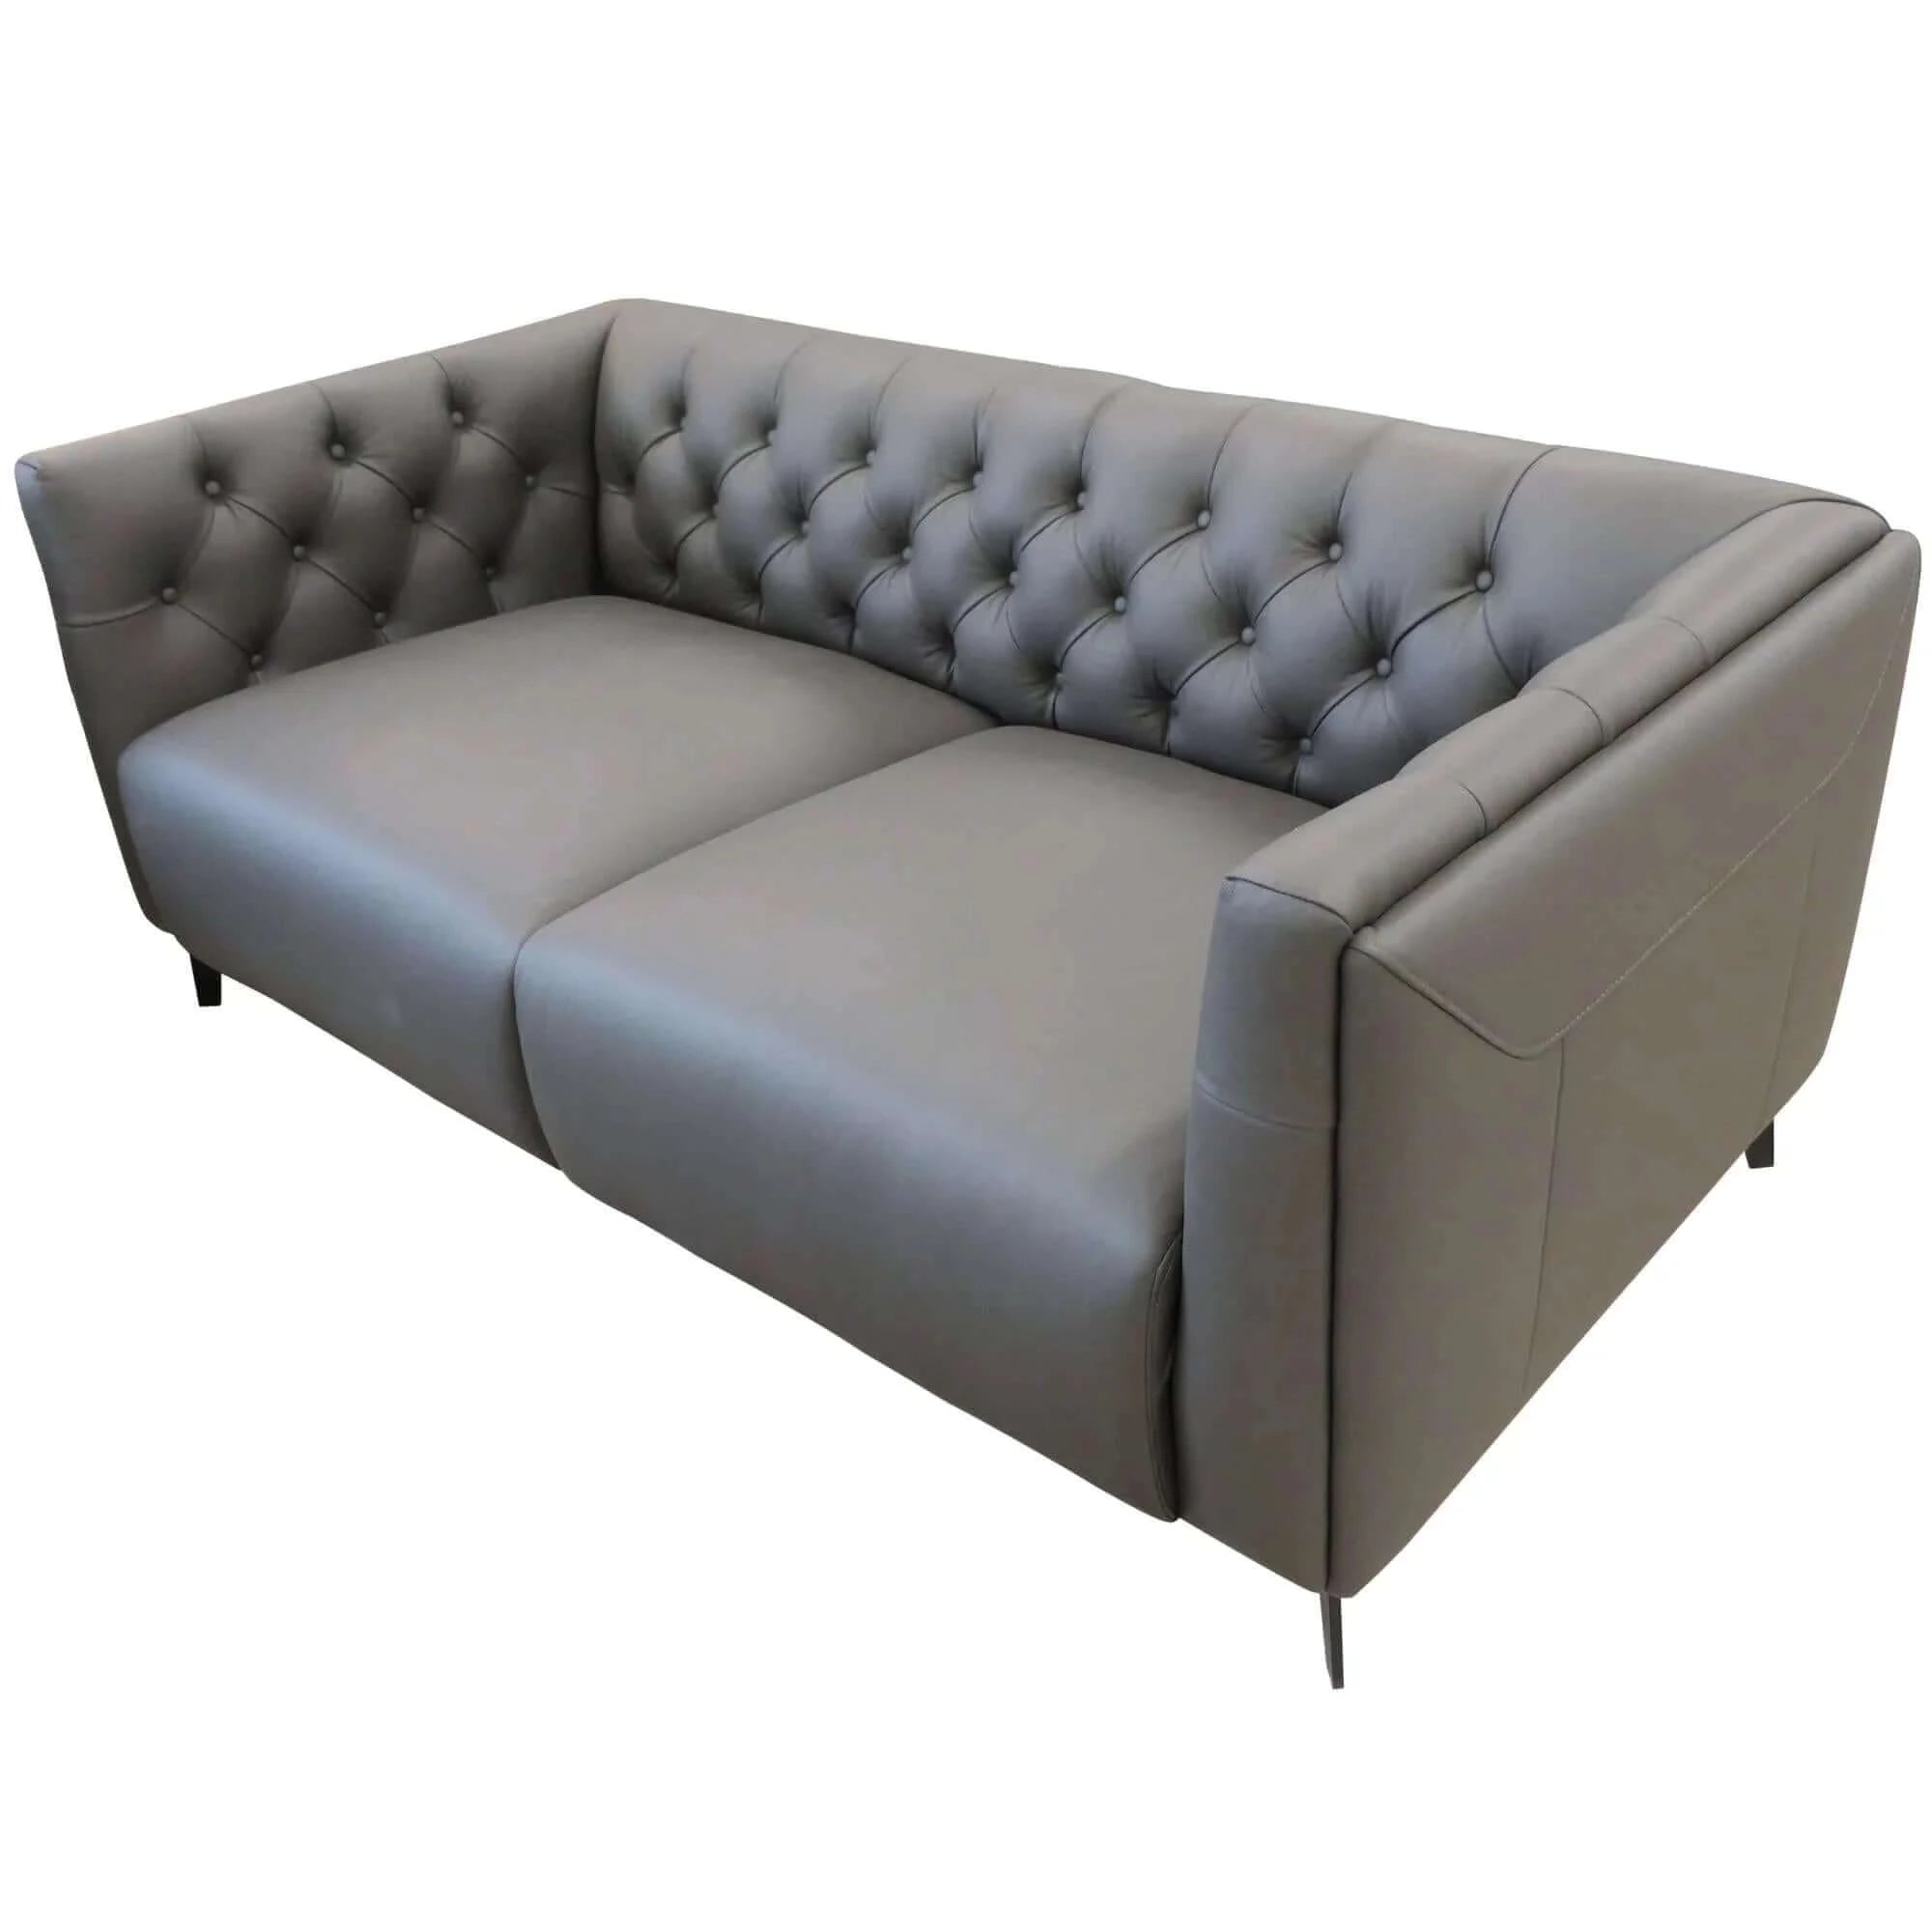 Buy luxe genuine forli leather sofa 2.5 seater upholstered lounge couch - dark grey - upinteriors-Upinteriors